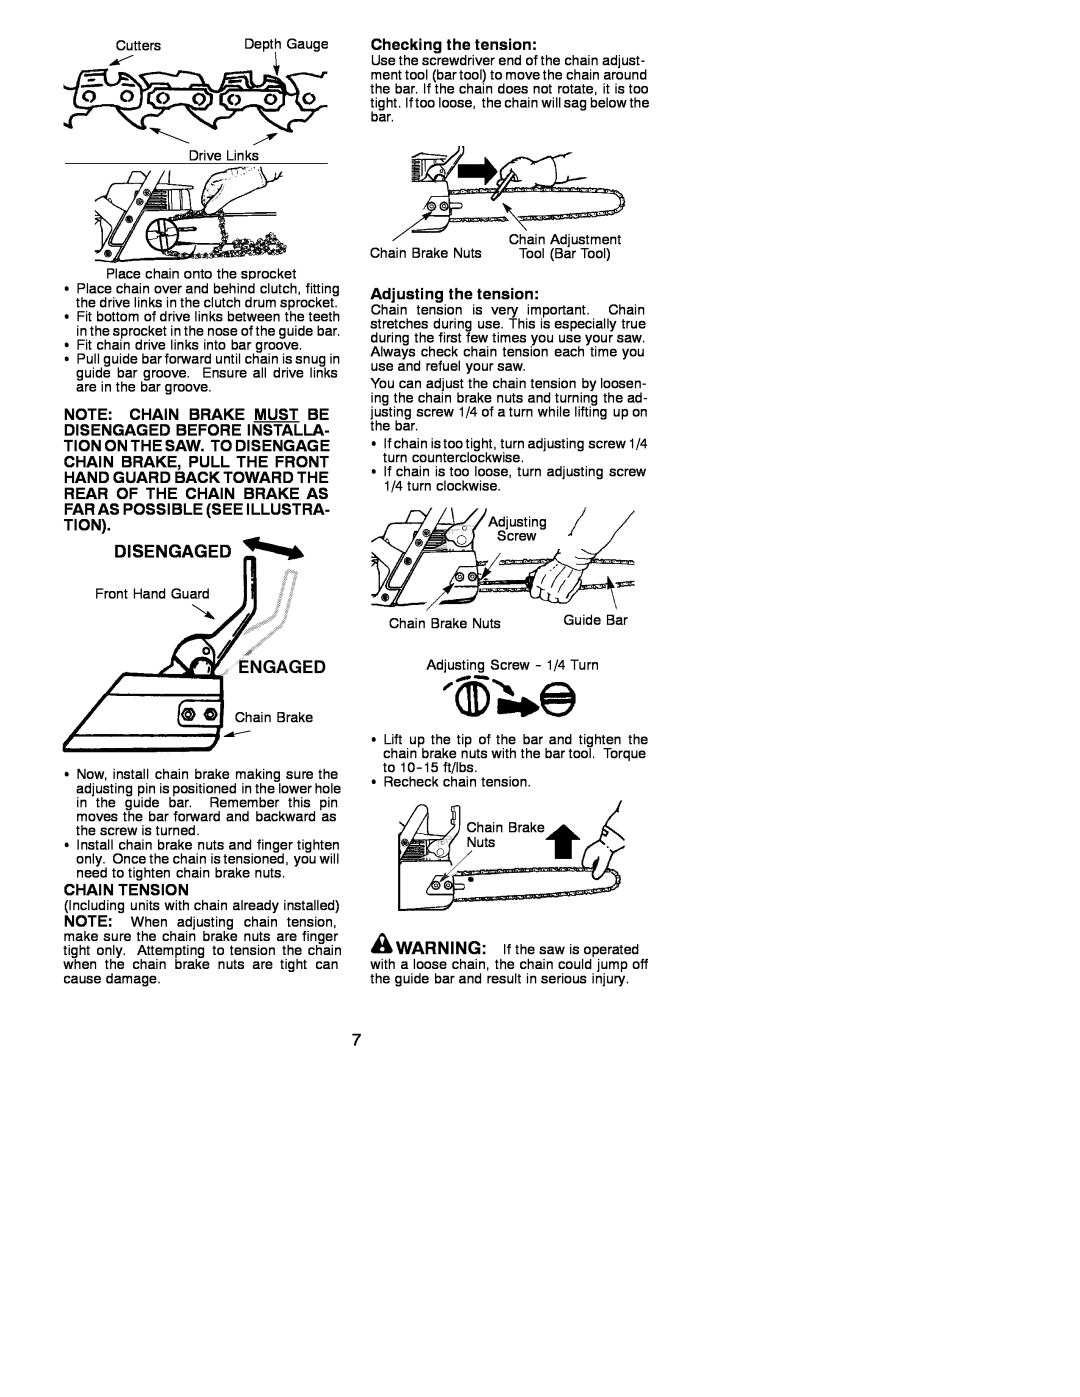 Poulan 530086667 instruction manual Disengaged, Engaged, Checking the tension, Adjusting the tension, Chain Tension 